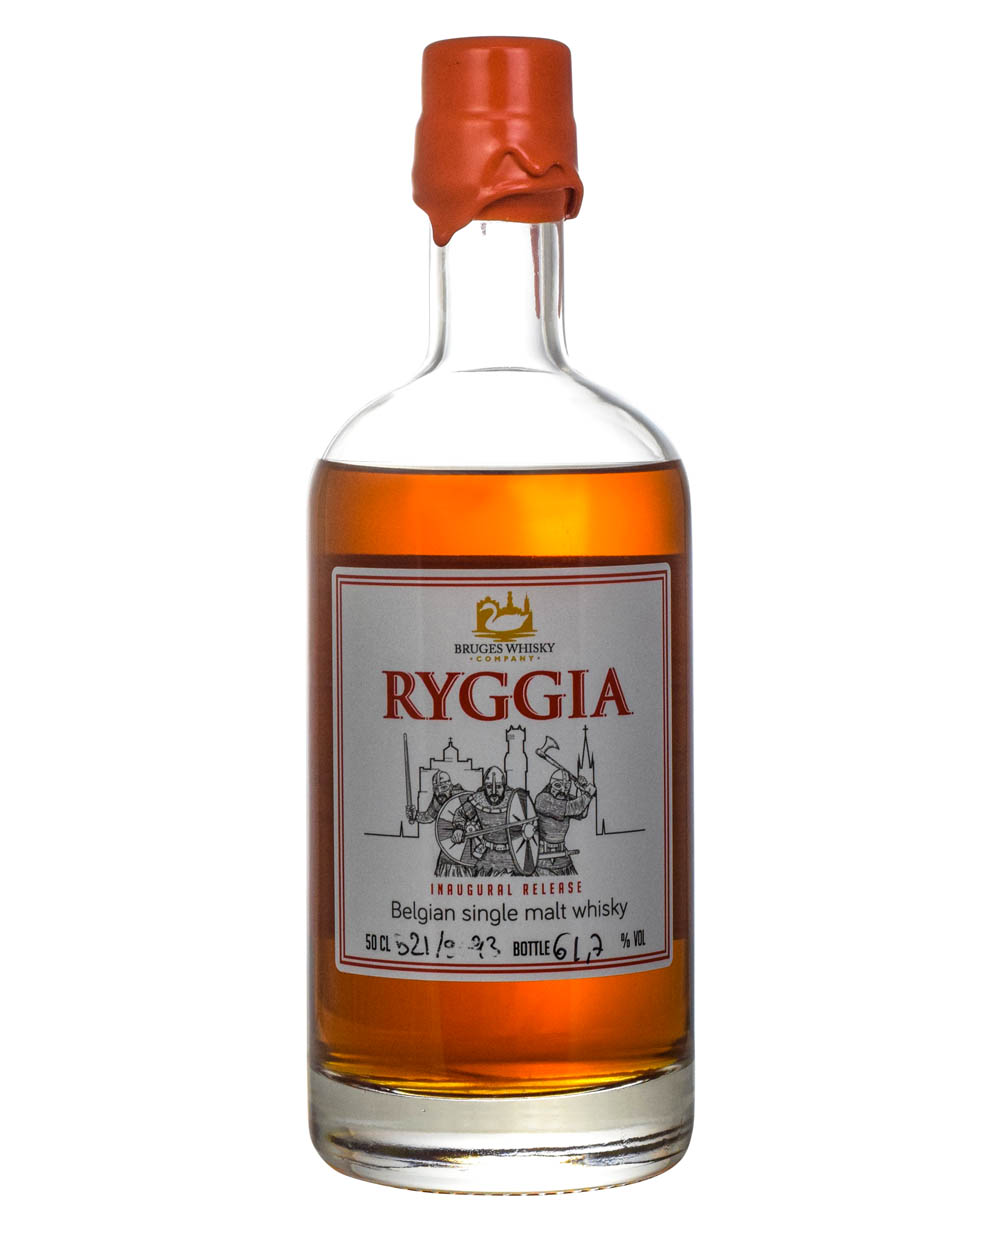 Ryggia Bruges Whisky Inaugural Release Belgian Whisky Must Have Malts MHM